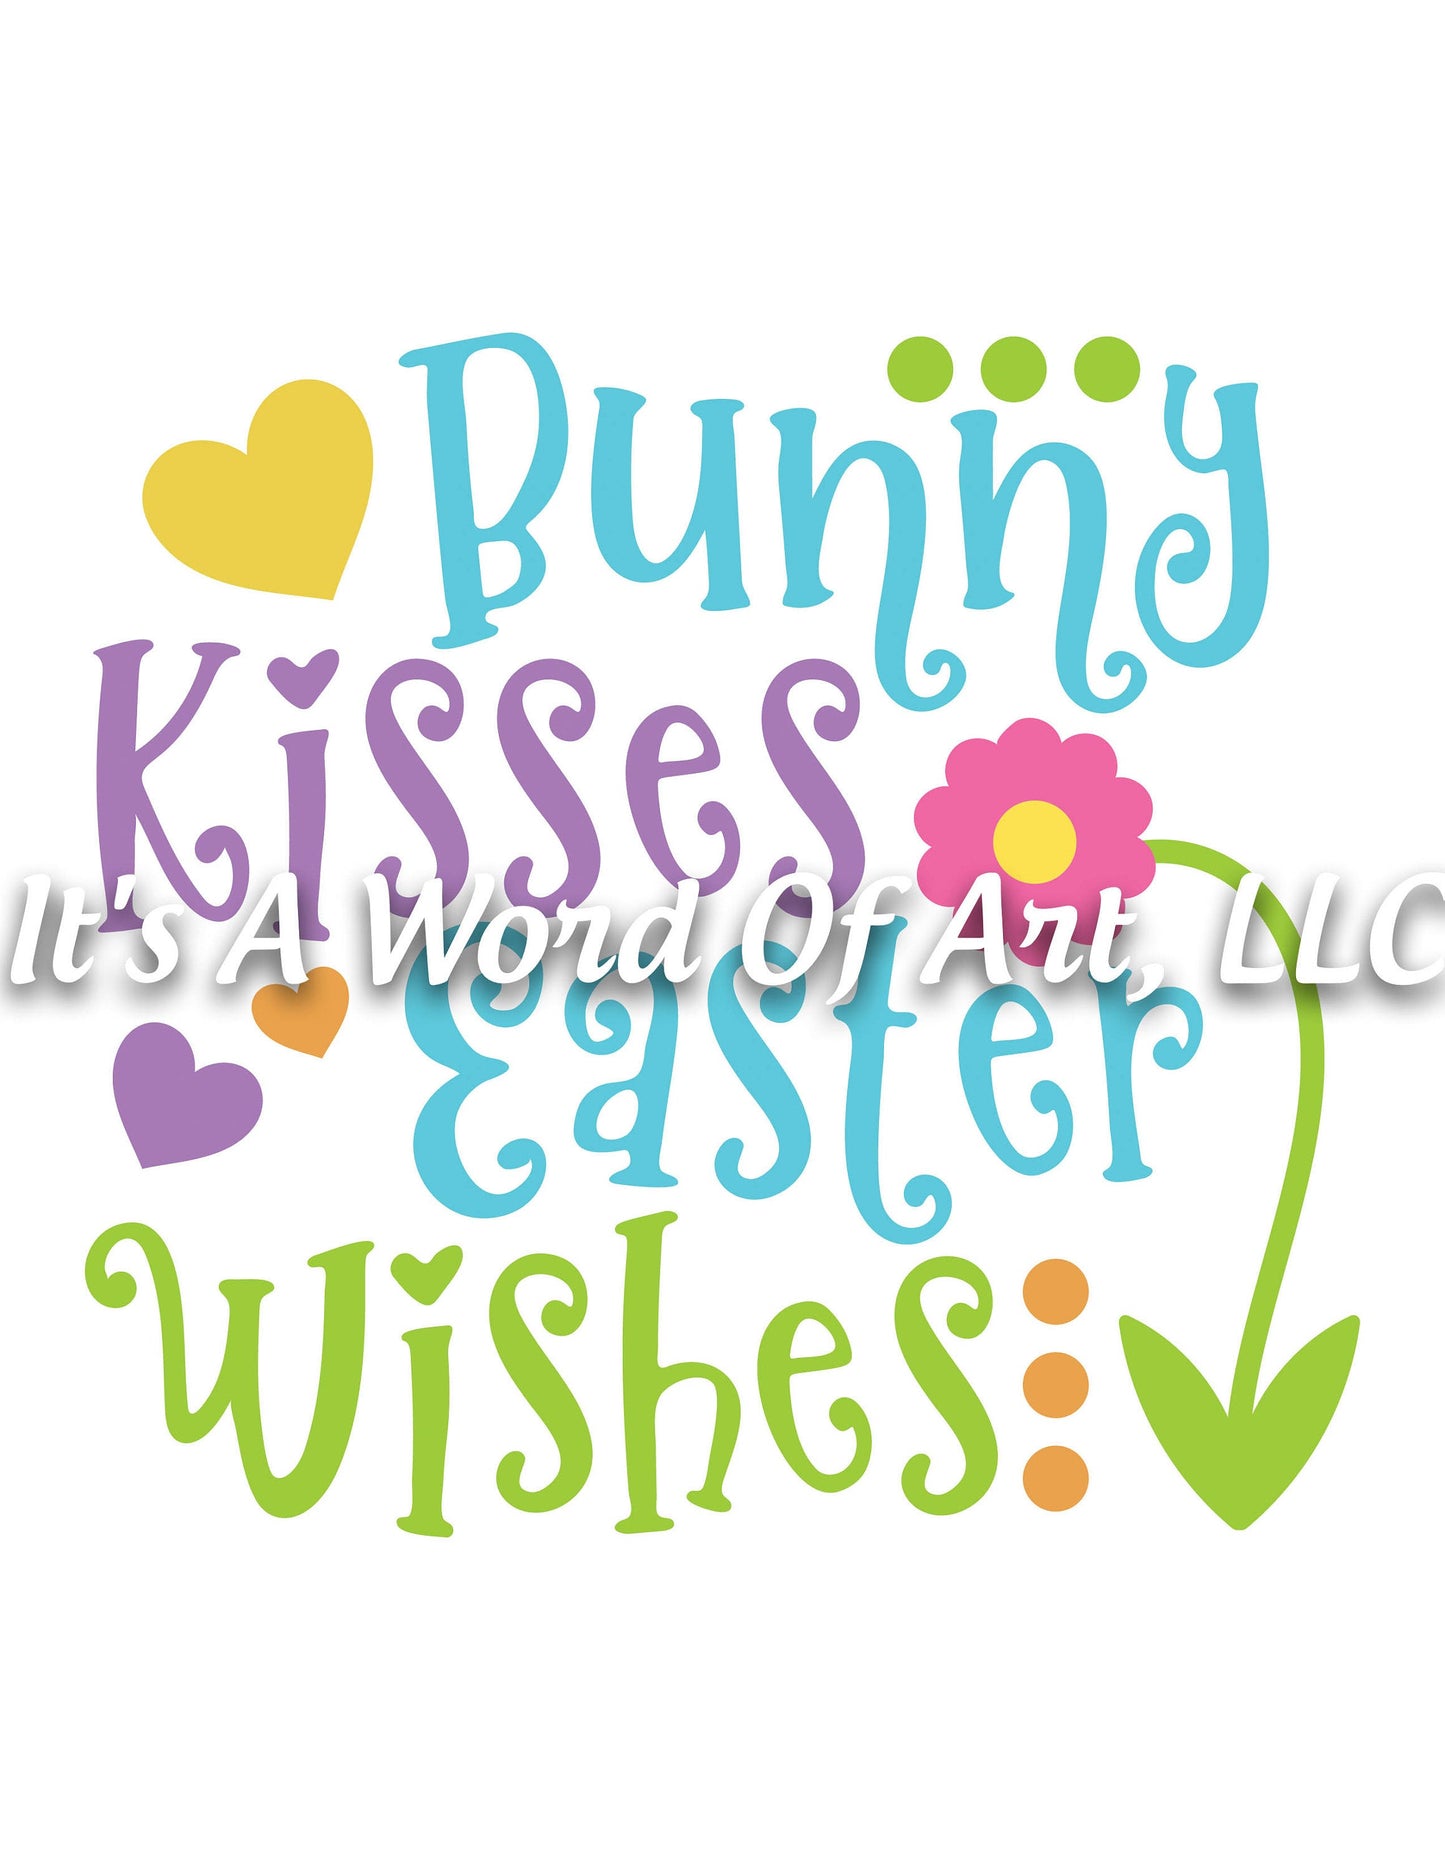 Easter 2 - Bunny Kisses Easter Wishes - Sublimation Transfer Set/Ready To Press Sublimation Transfer/Sublimation Transfer - Easter Shirt